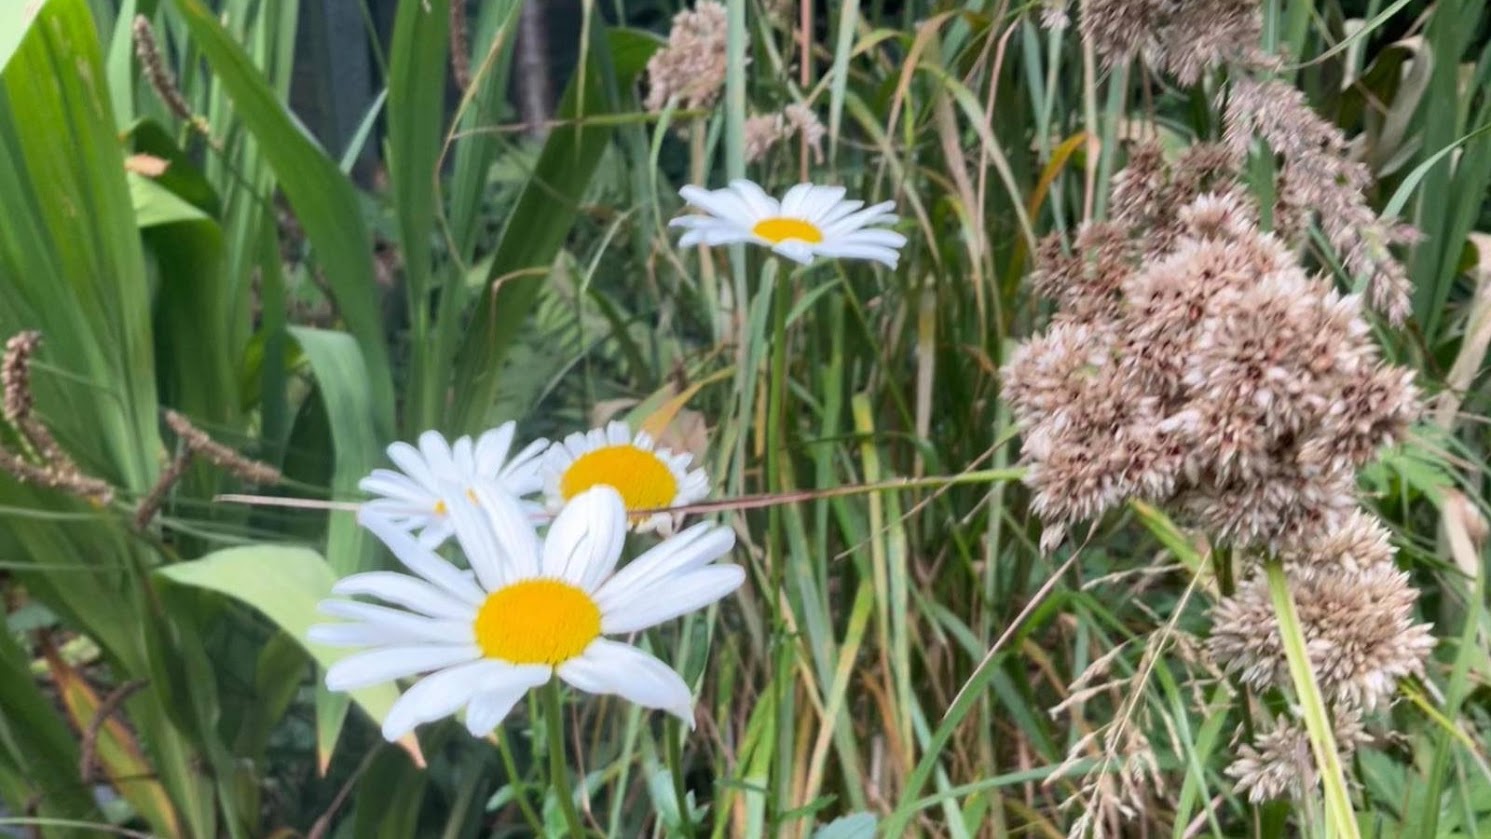 White Ox-eye daisies and browning grasses in the foreground, long green leaves of Montbretia and Crocosmia in the background.